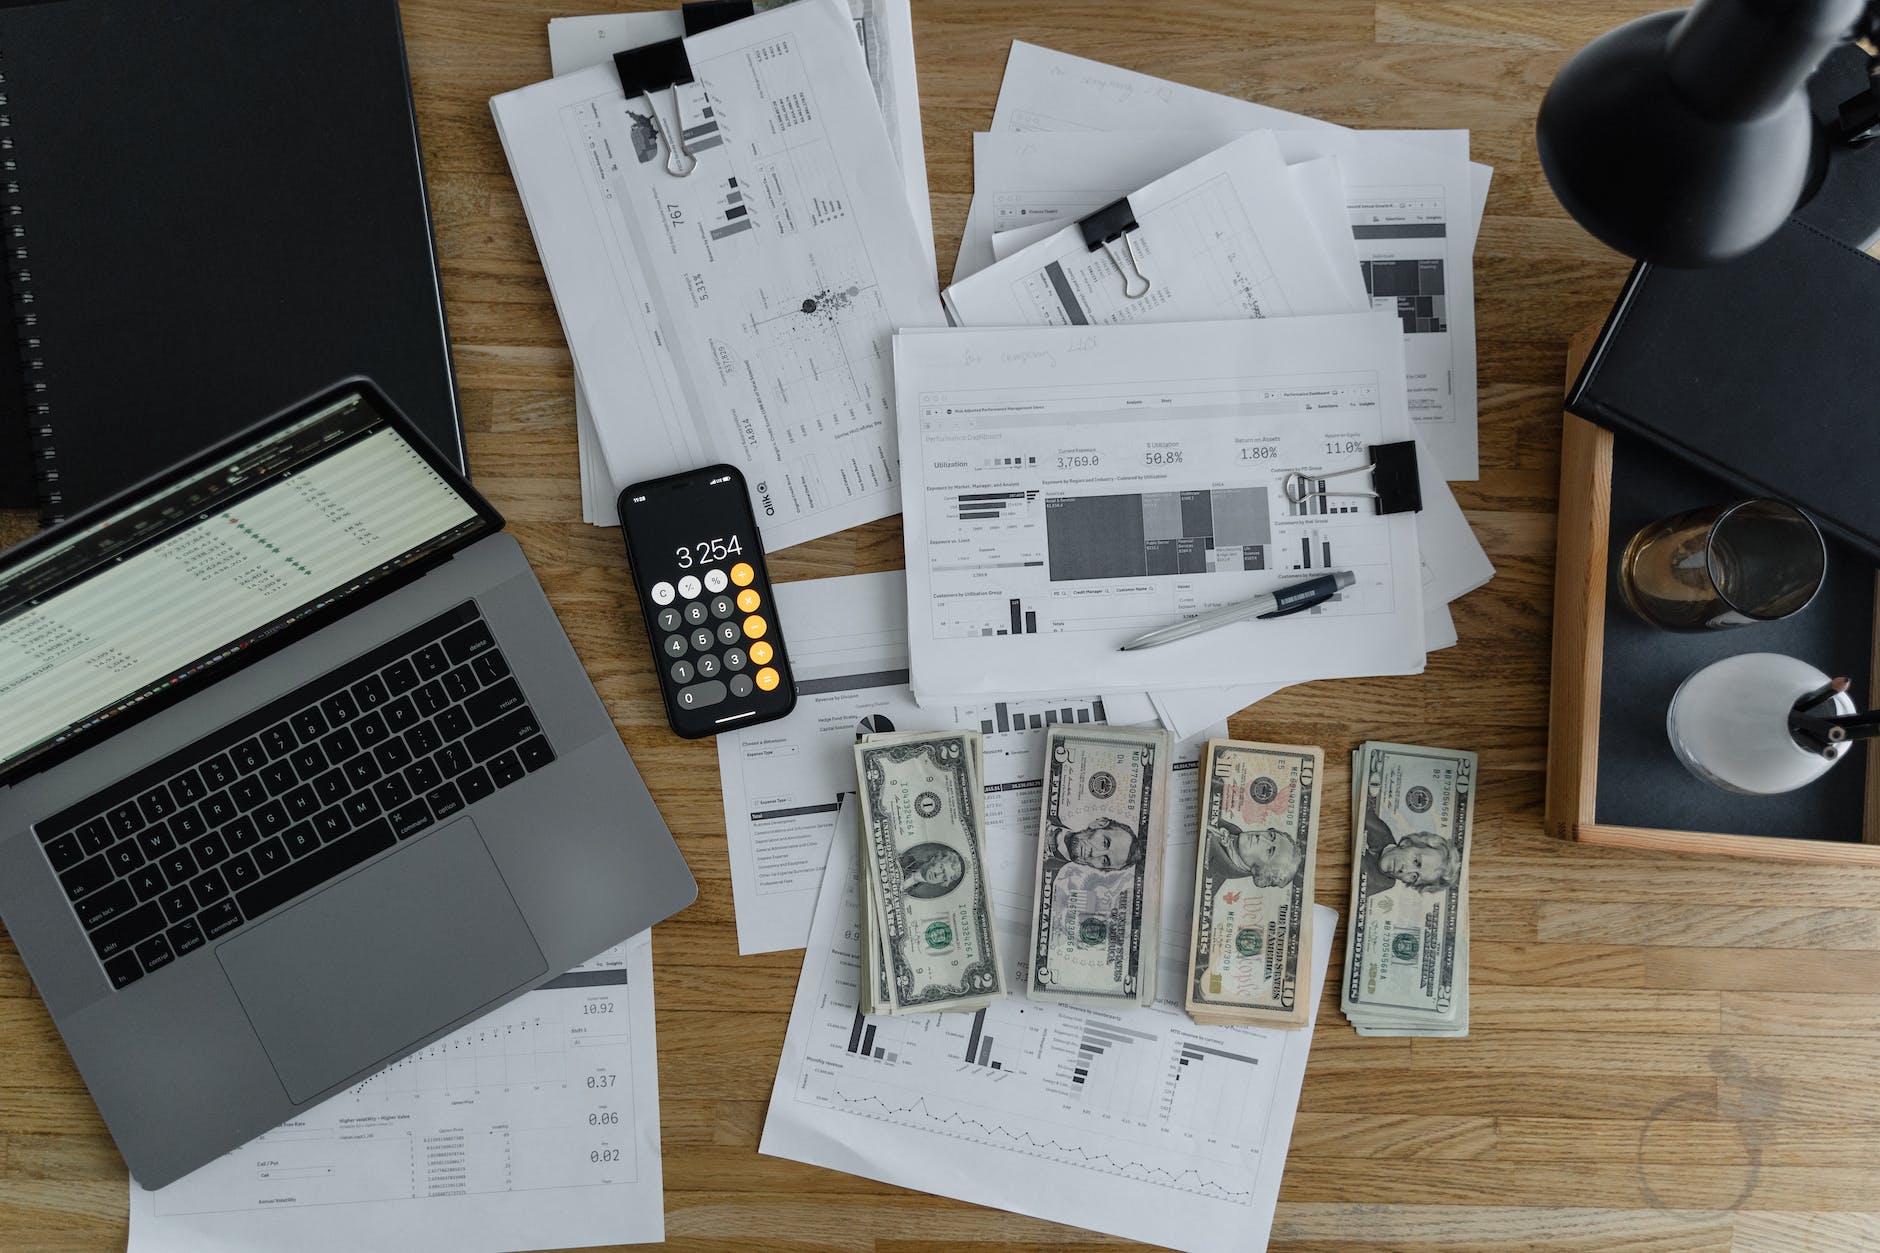 Managing monthly bills can seem overwhelming, but there are several steps you can take to make the process easier